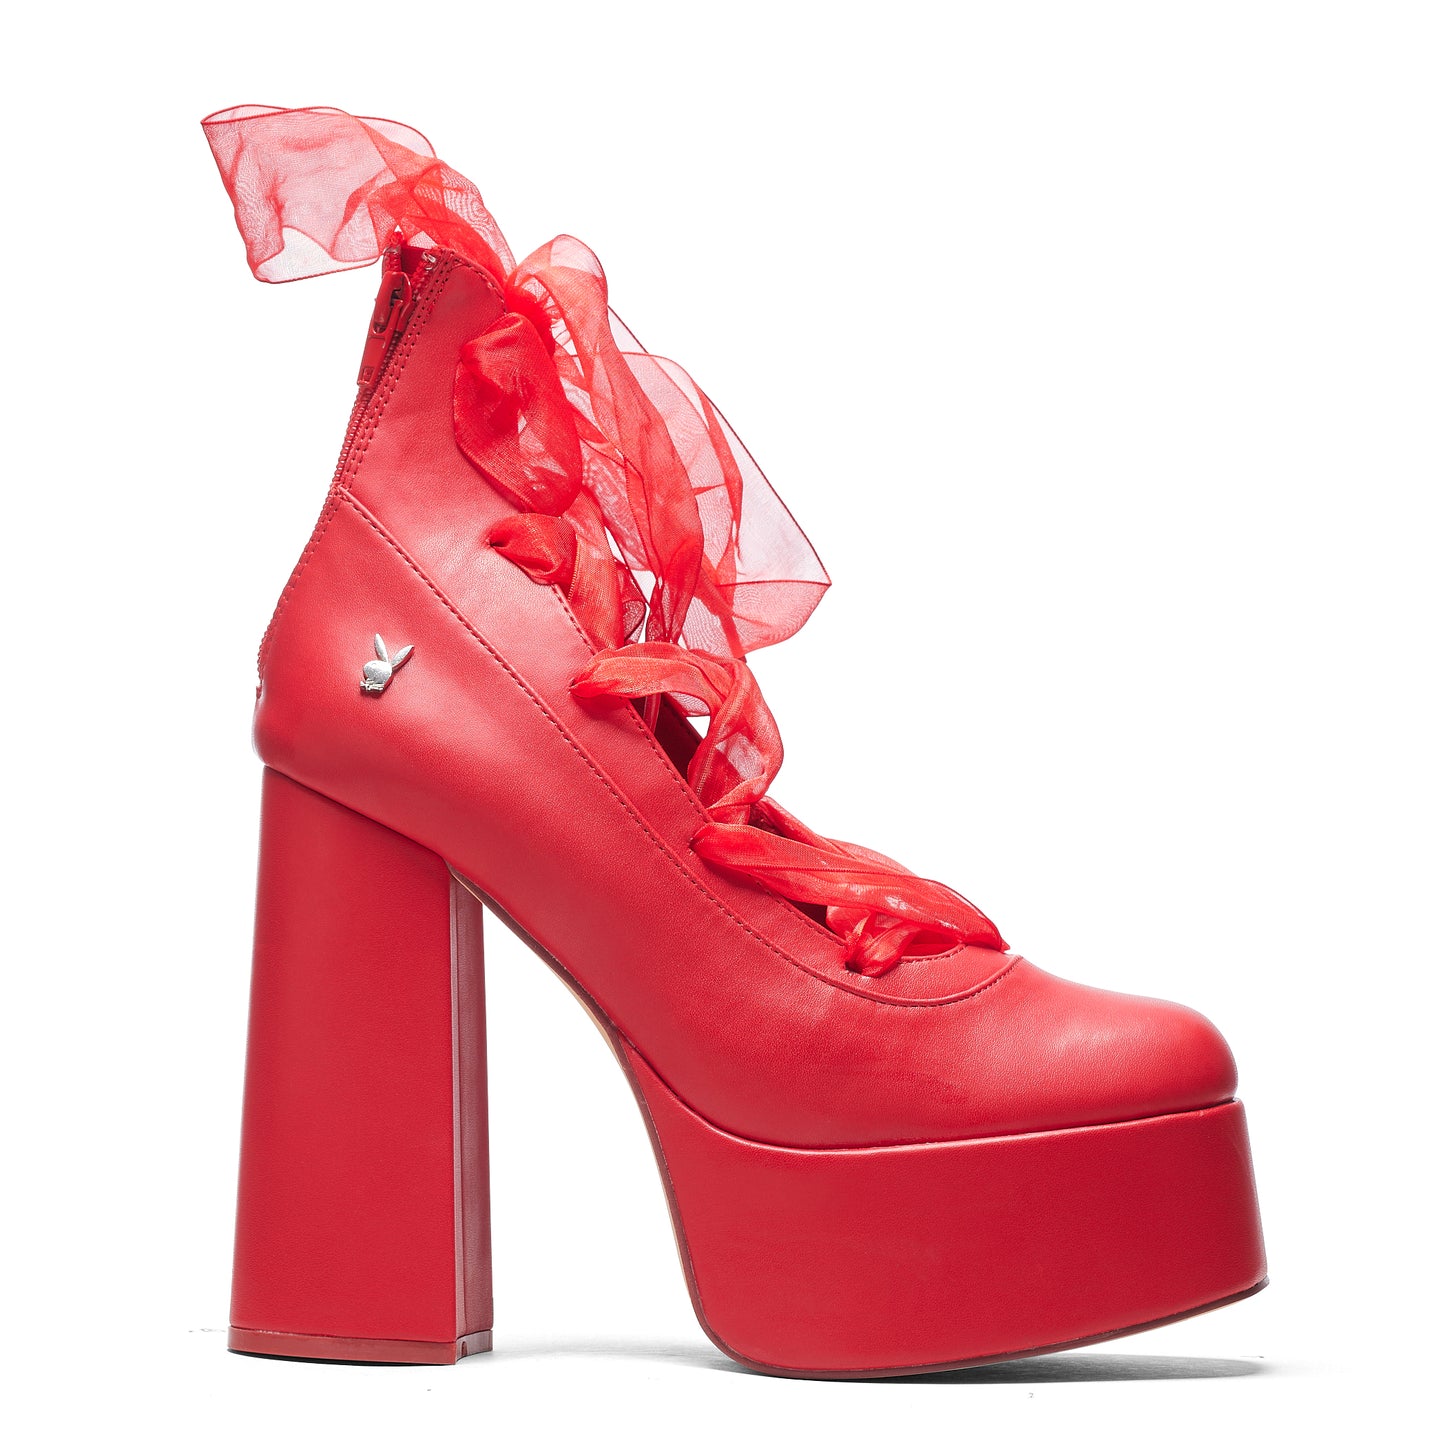 Playboy Infidelity Red Lace Up Heels - Shoes - KOI Footwear - Red - Side View